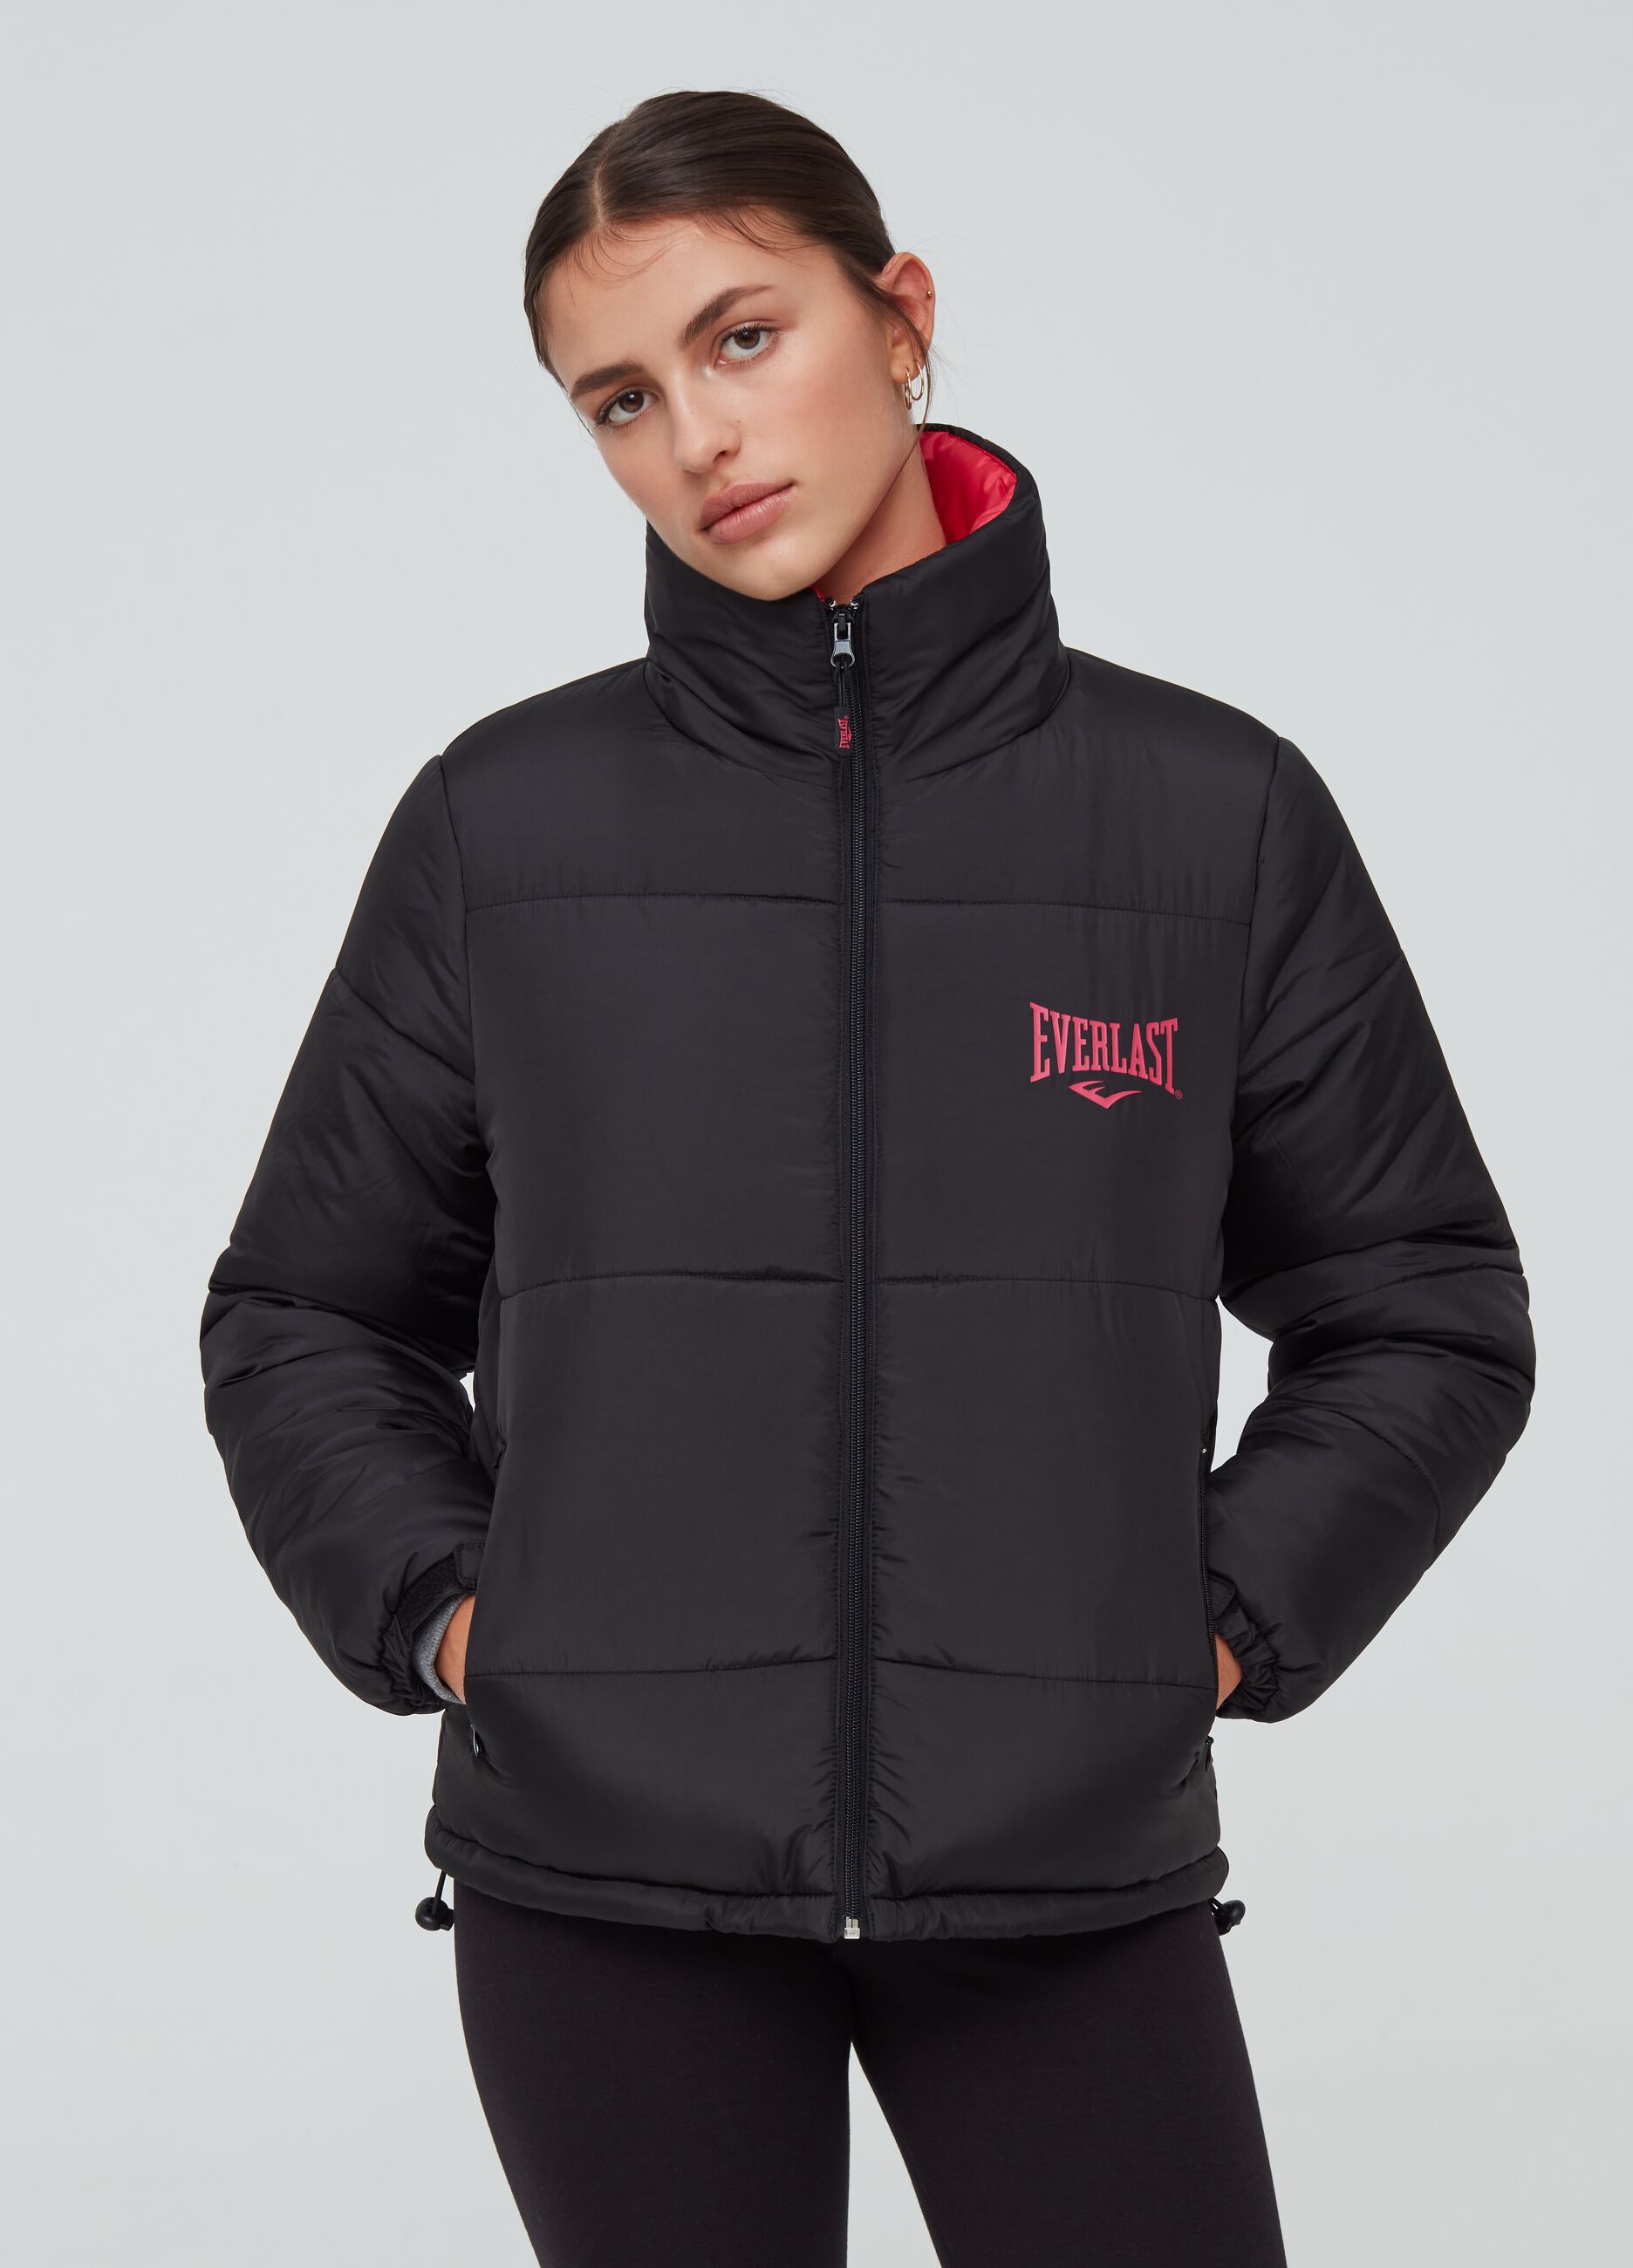 Everlast padded jacket with high neck